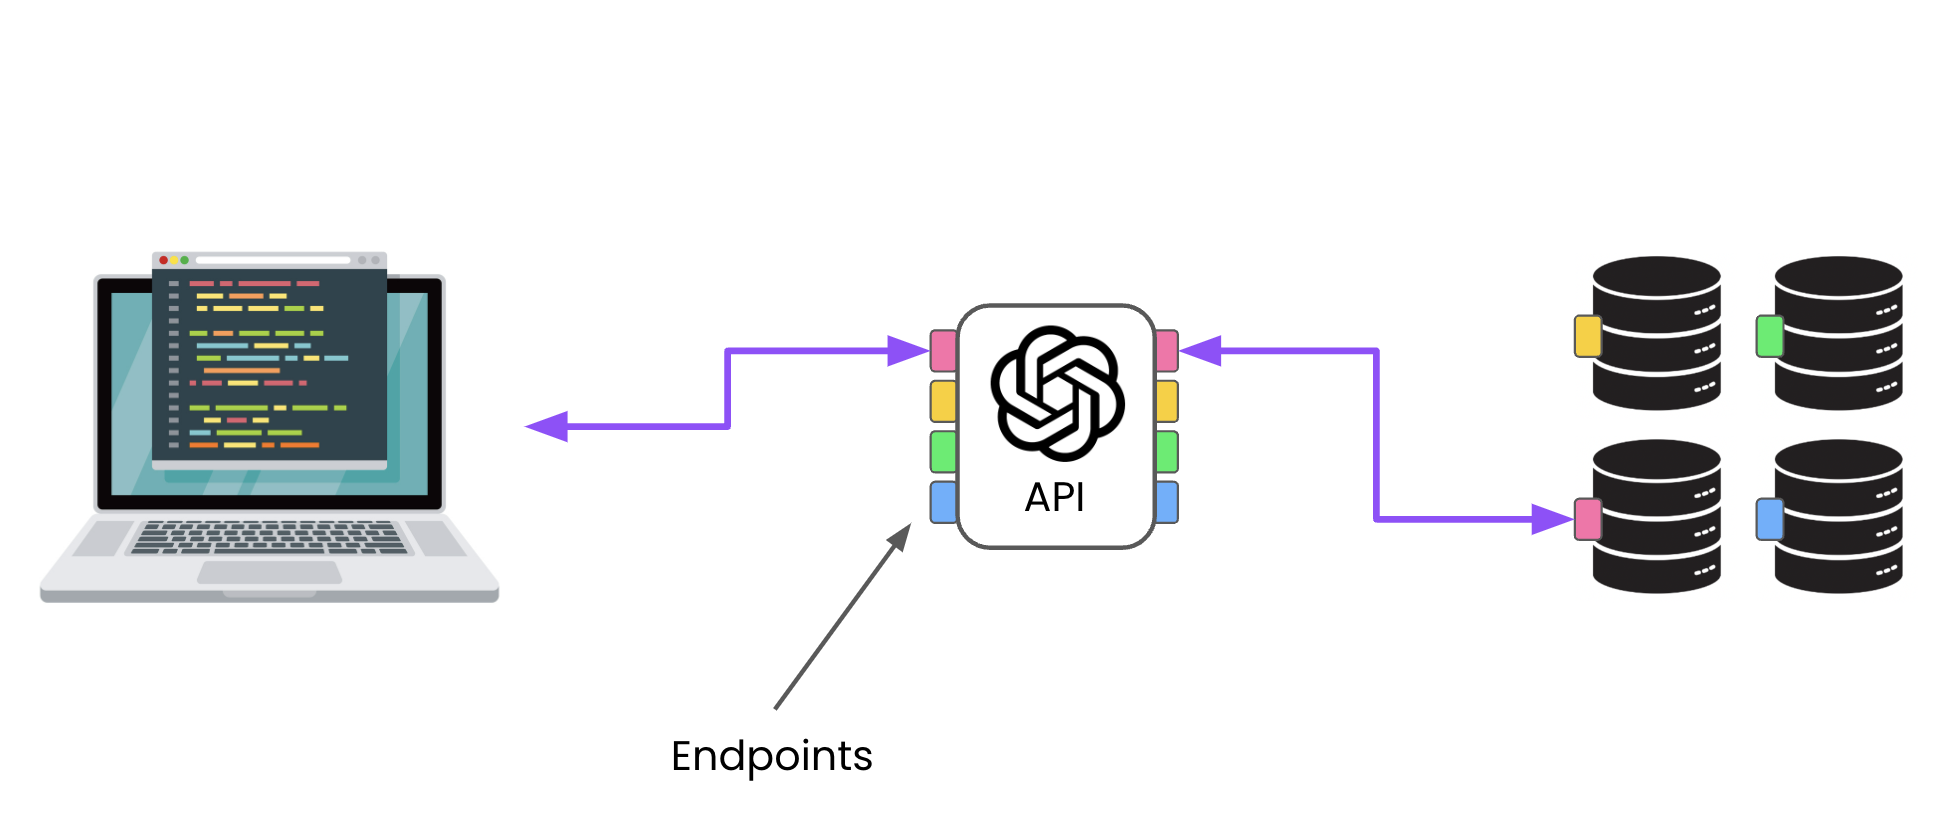 A computer connecting to the OpenAI via one of several endpoints, which are in-turn connected to different servers.